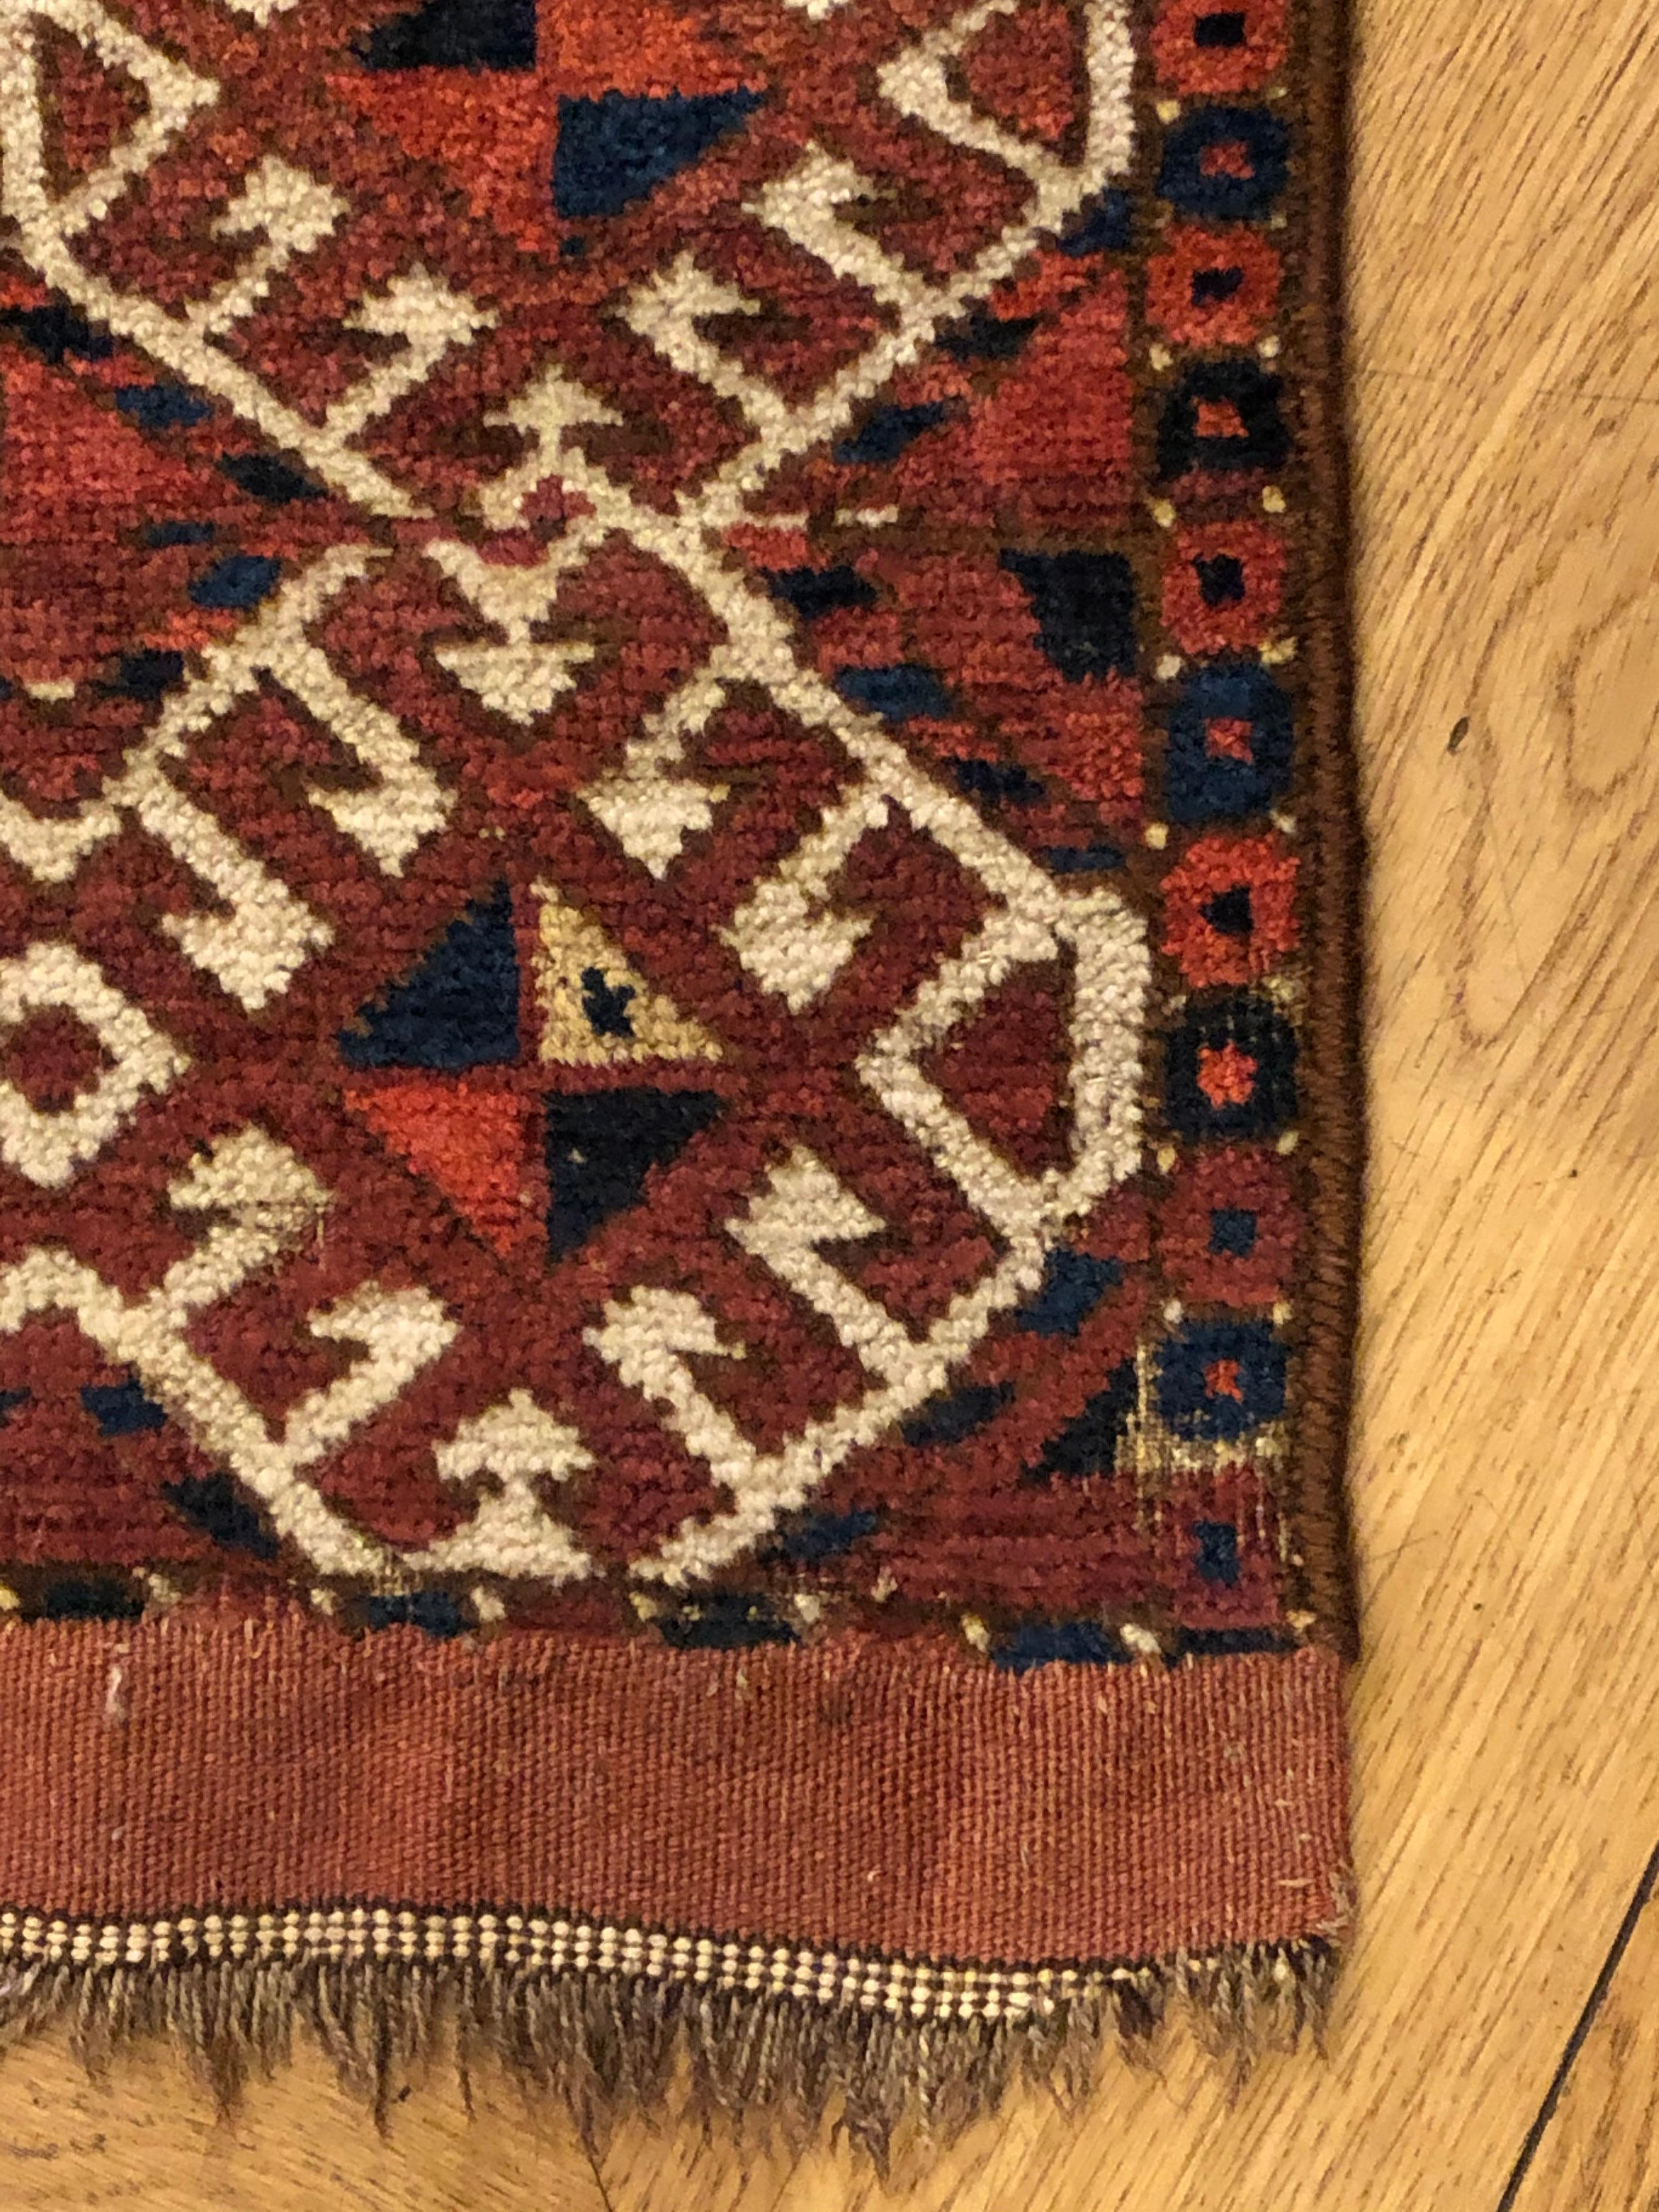 19th Century Red Blue White Geometric Archaic Polygonal Turkmen Rug, about 1870 For Sale 3